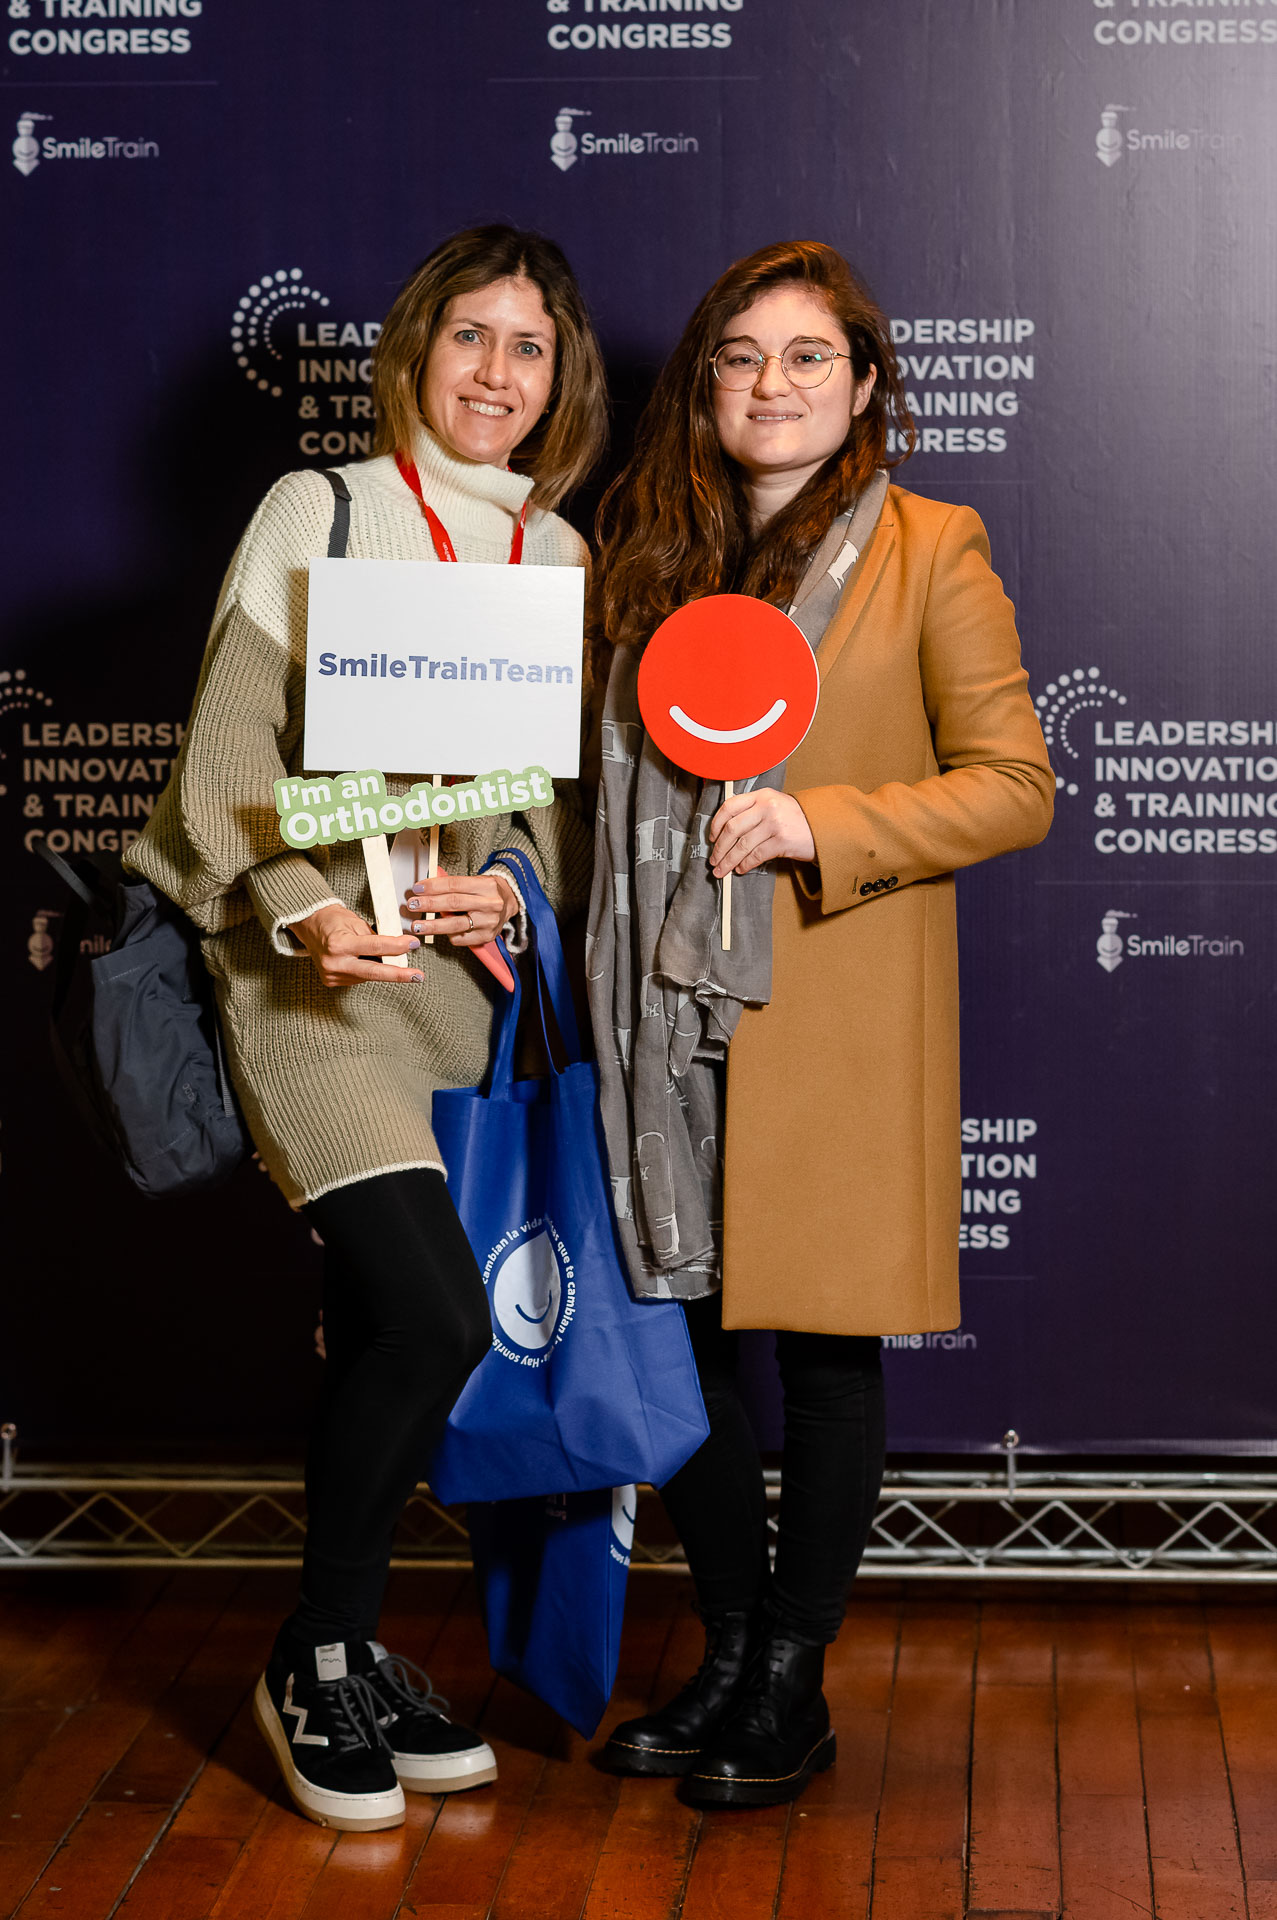 Francisca Salazar and Scarlette Norambuena posing with photobooth props. On the left, a sign reading ‘Smile Train Team’ and ‘I’m an Orthodontist.’ On the right, the orange smile logo